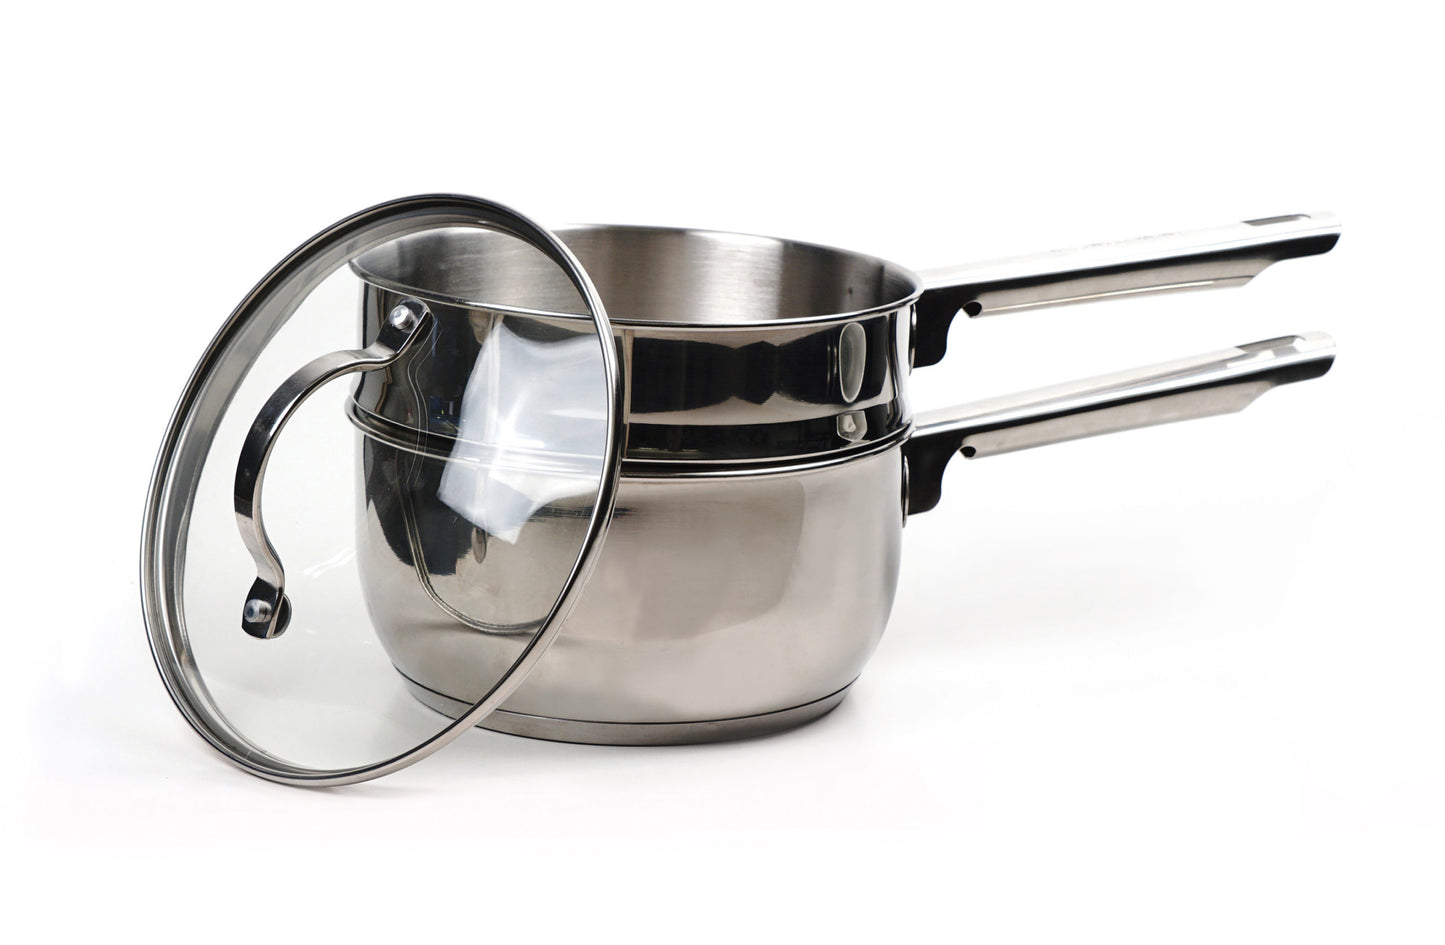 Double Boiler with lid leaning on it on white background.